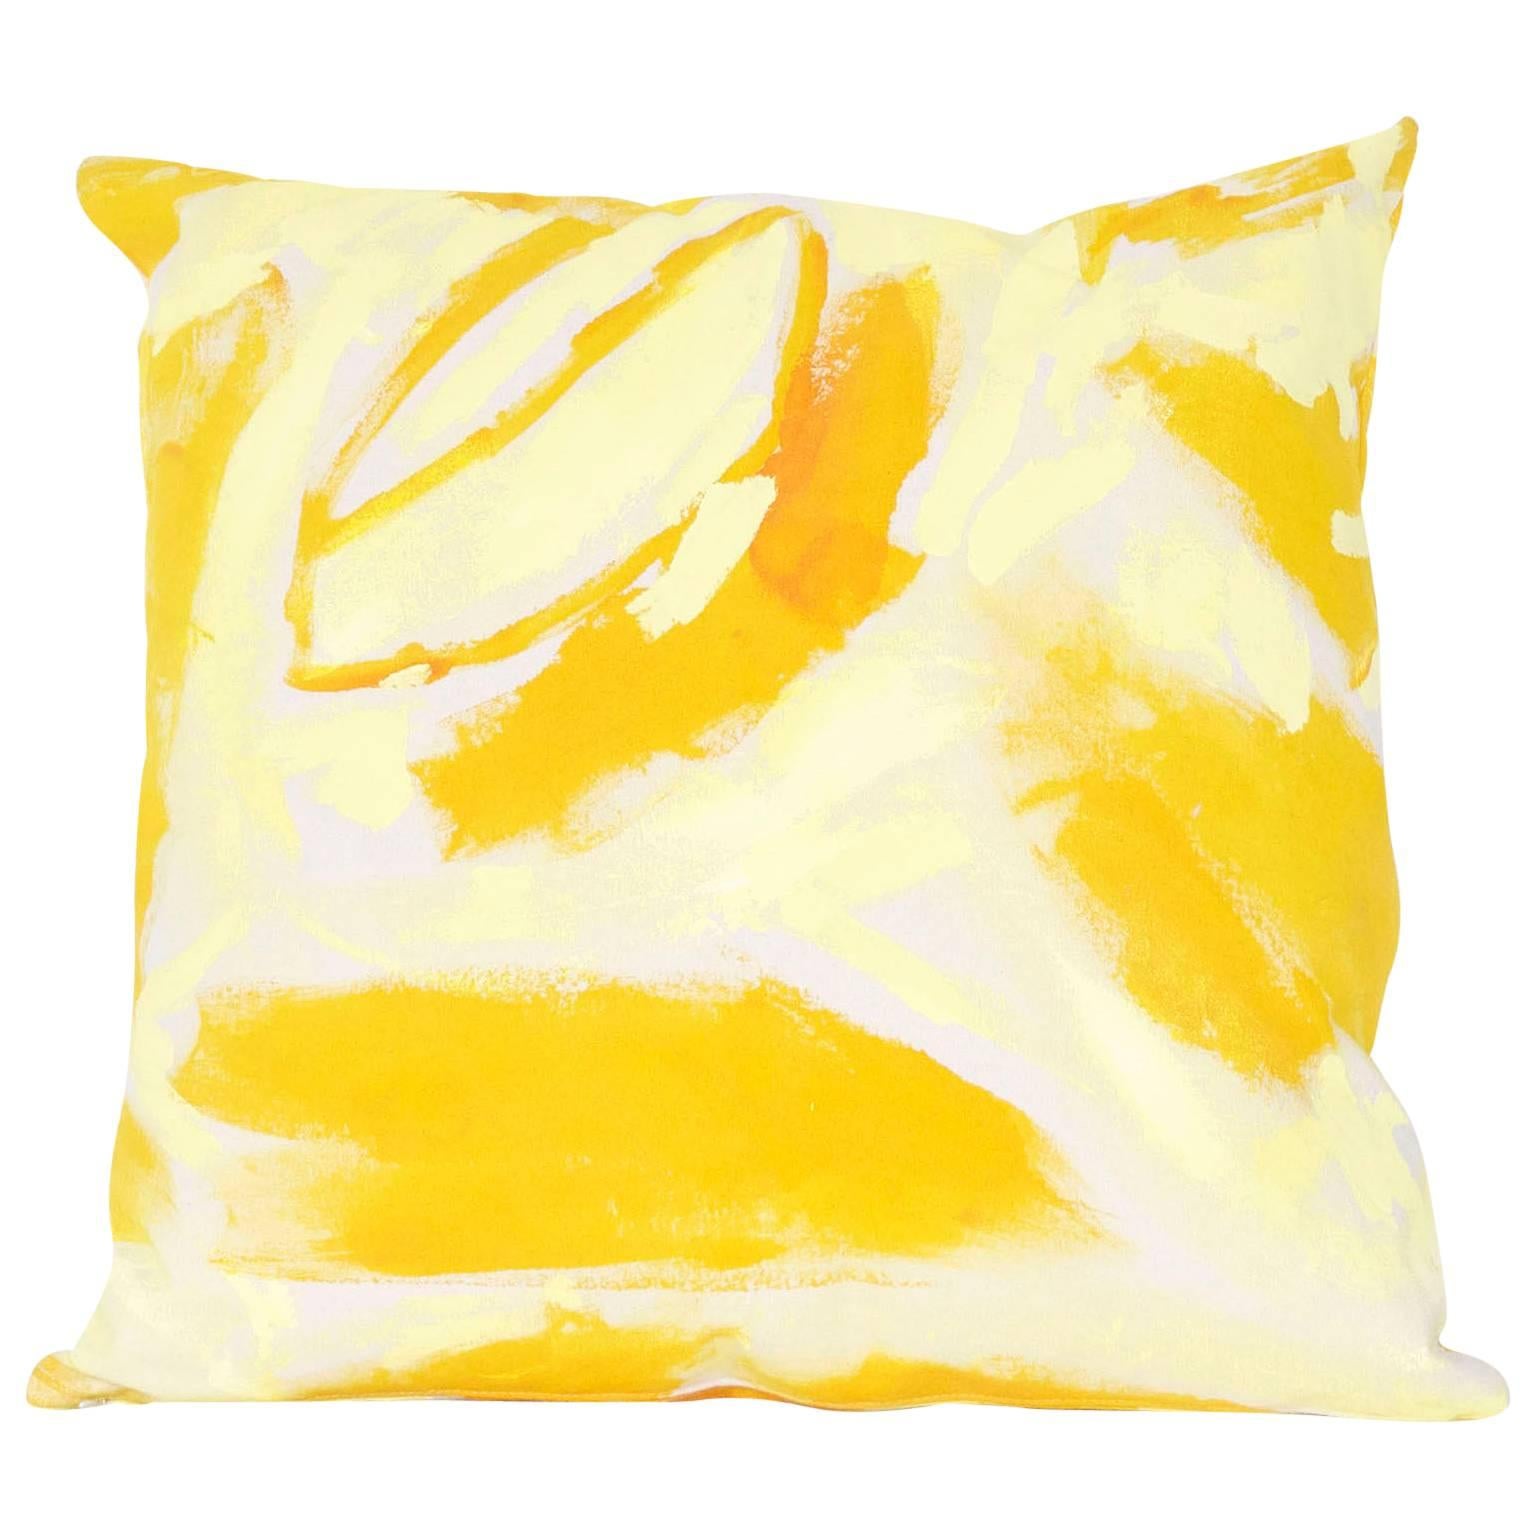 Yellow Two Hue Hand-Painted Canvas Square Pillow